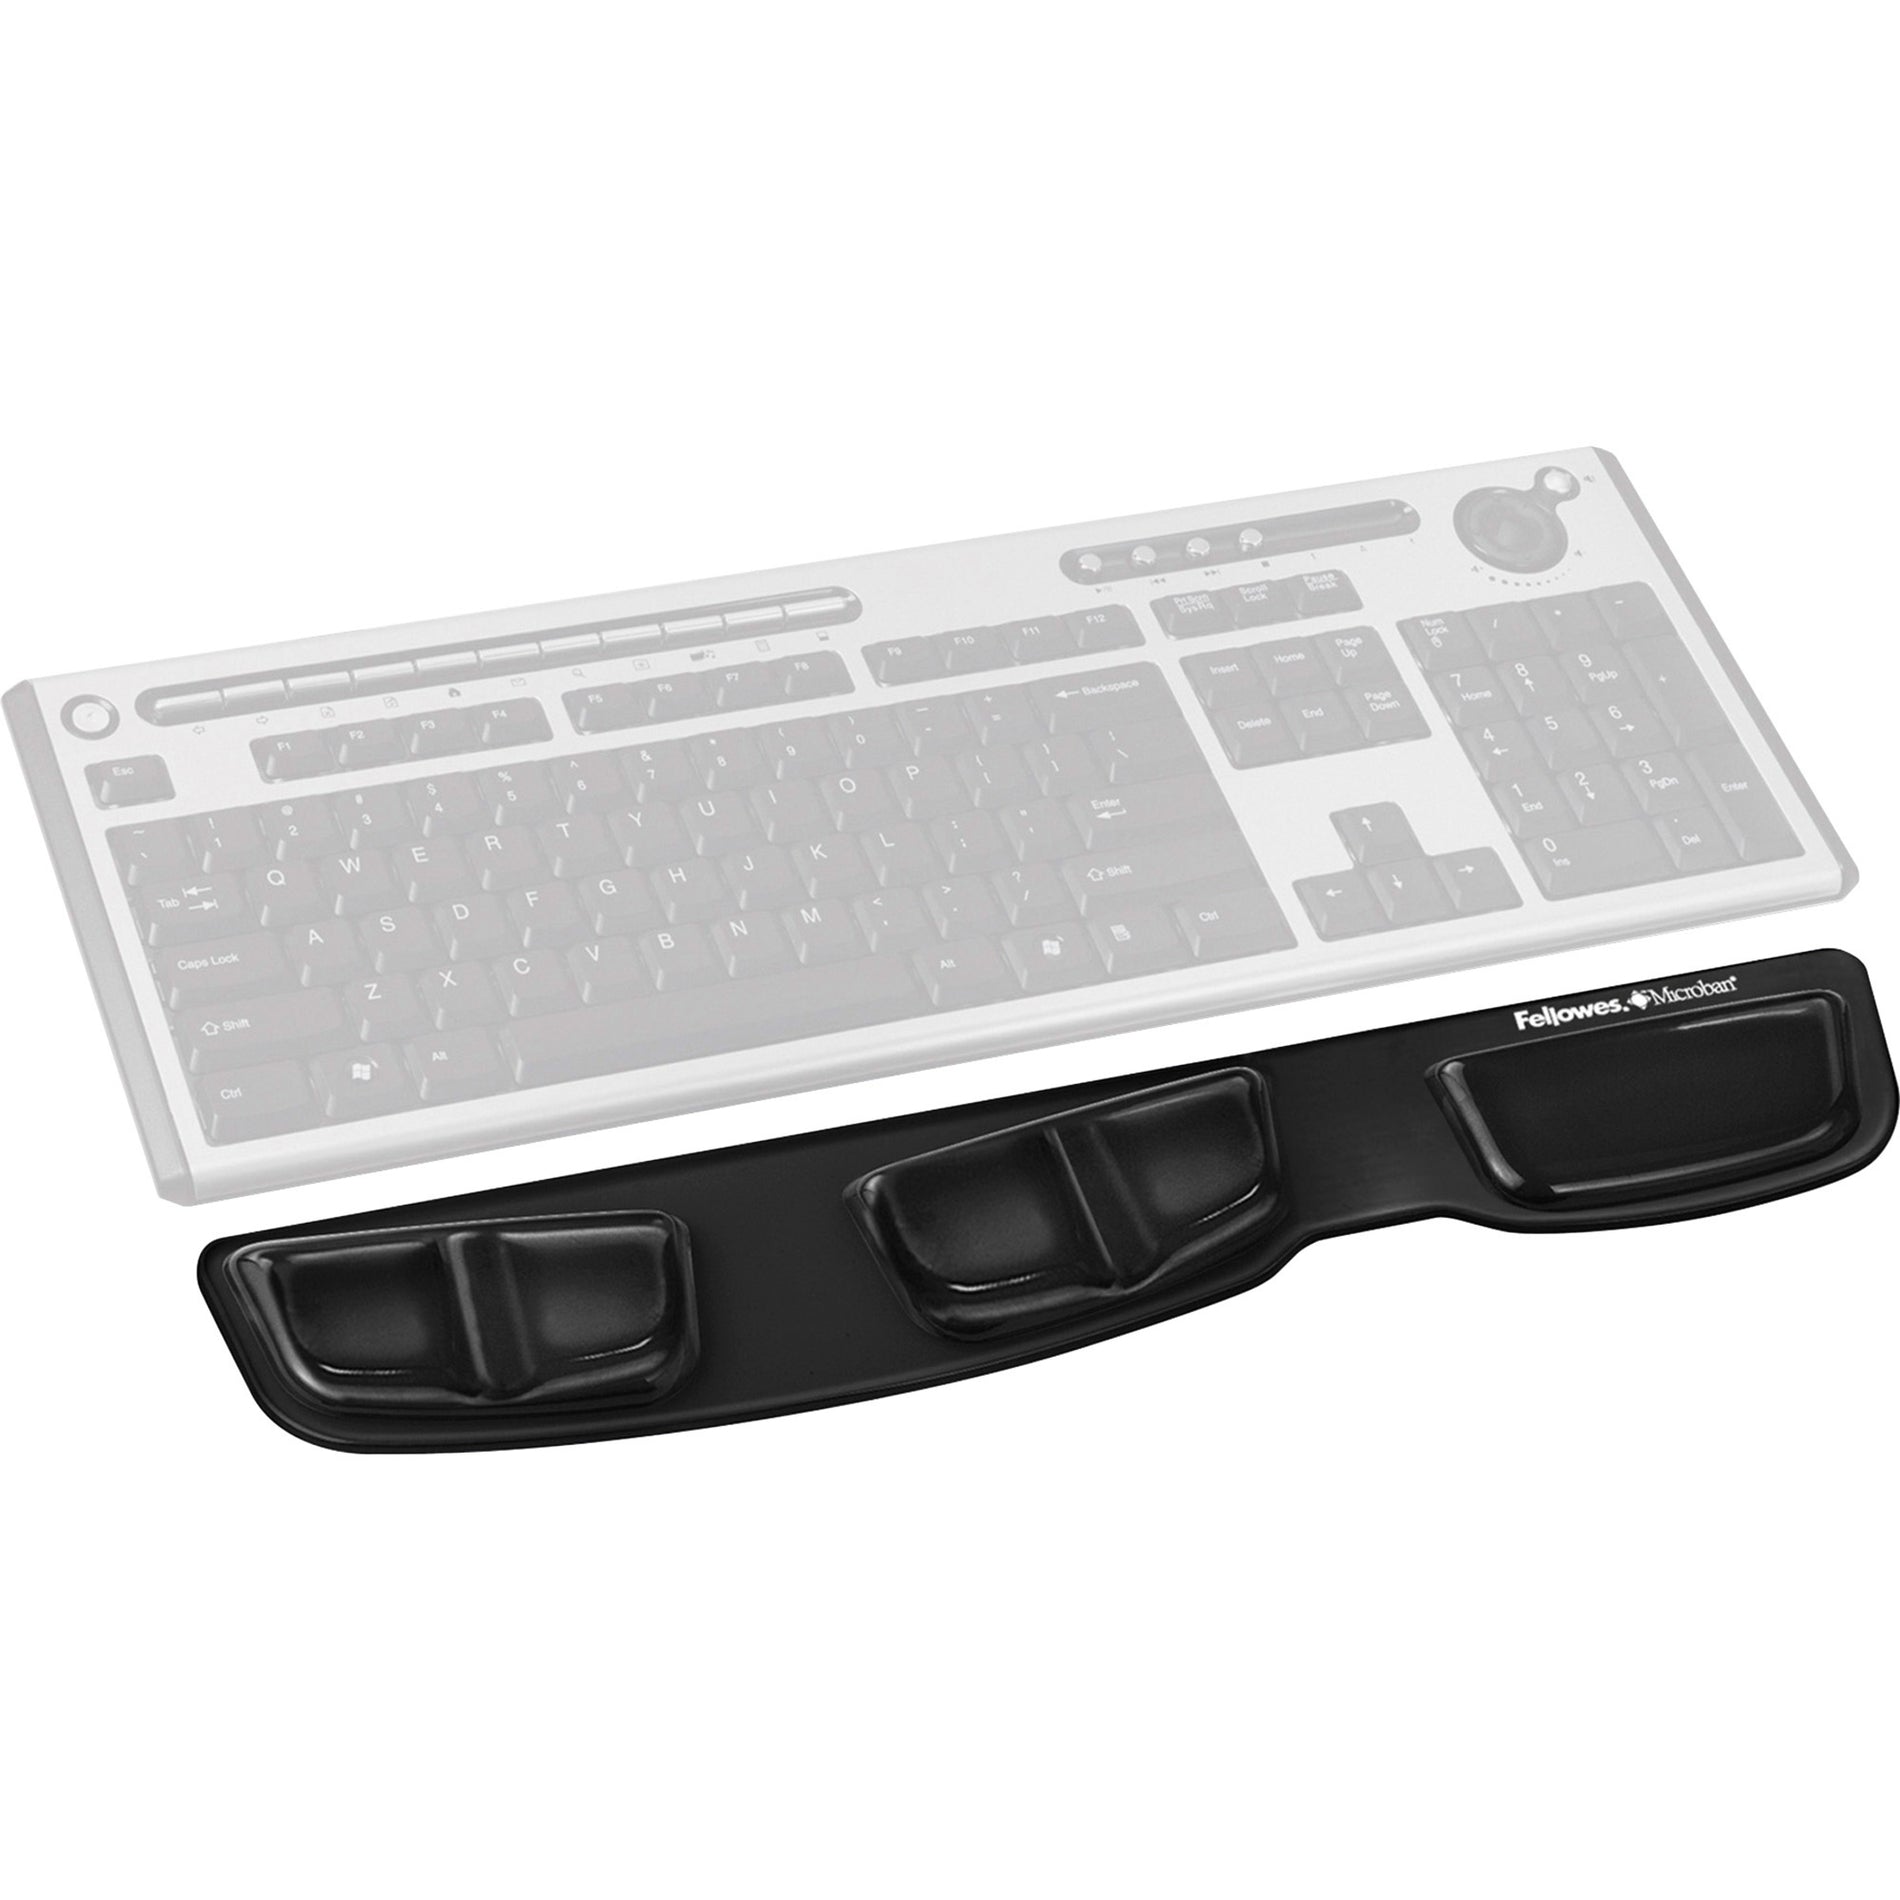 Fellowes 9183201 Keyboard Palm Support with Microban® Protection, Pressure Reliever, Comfortable, Health V-Channel, Antimicrobial